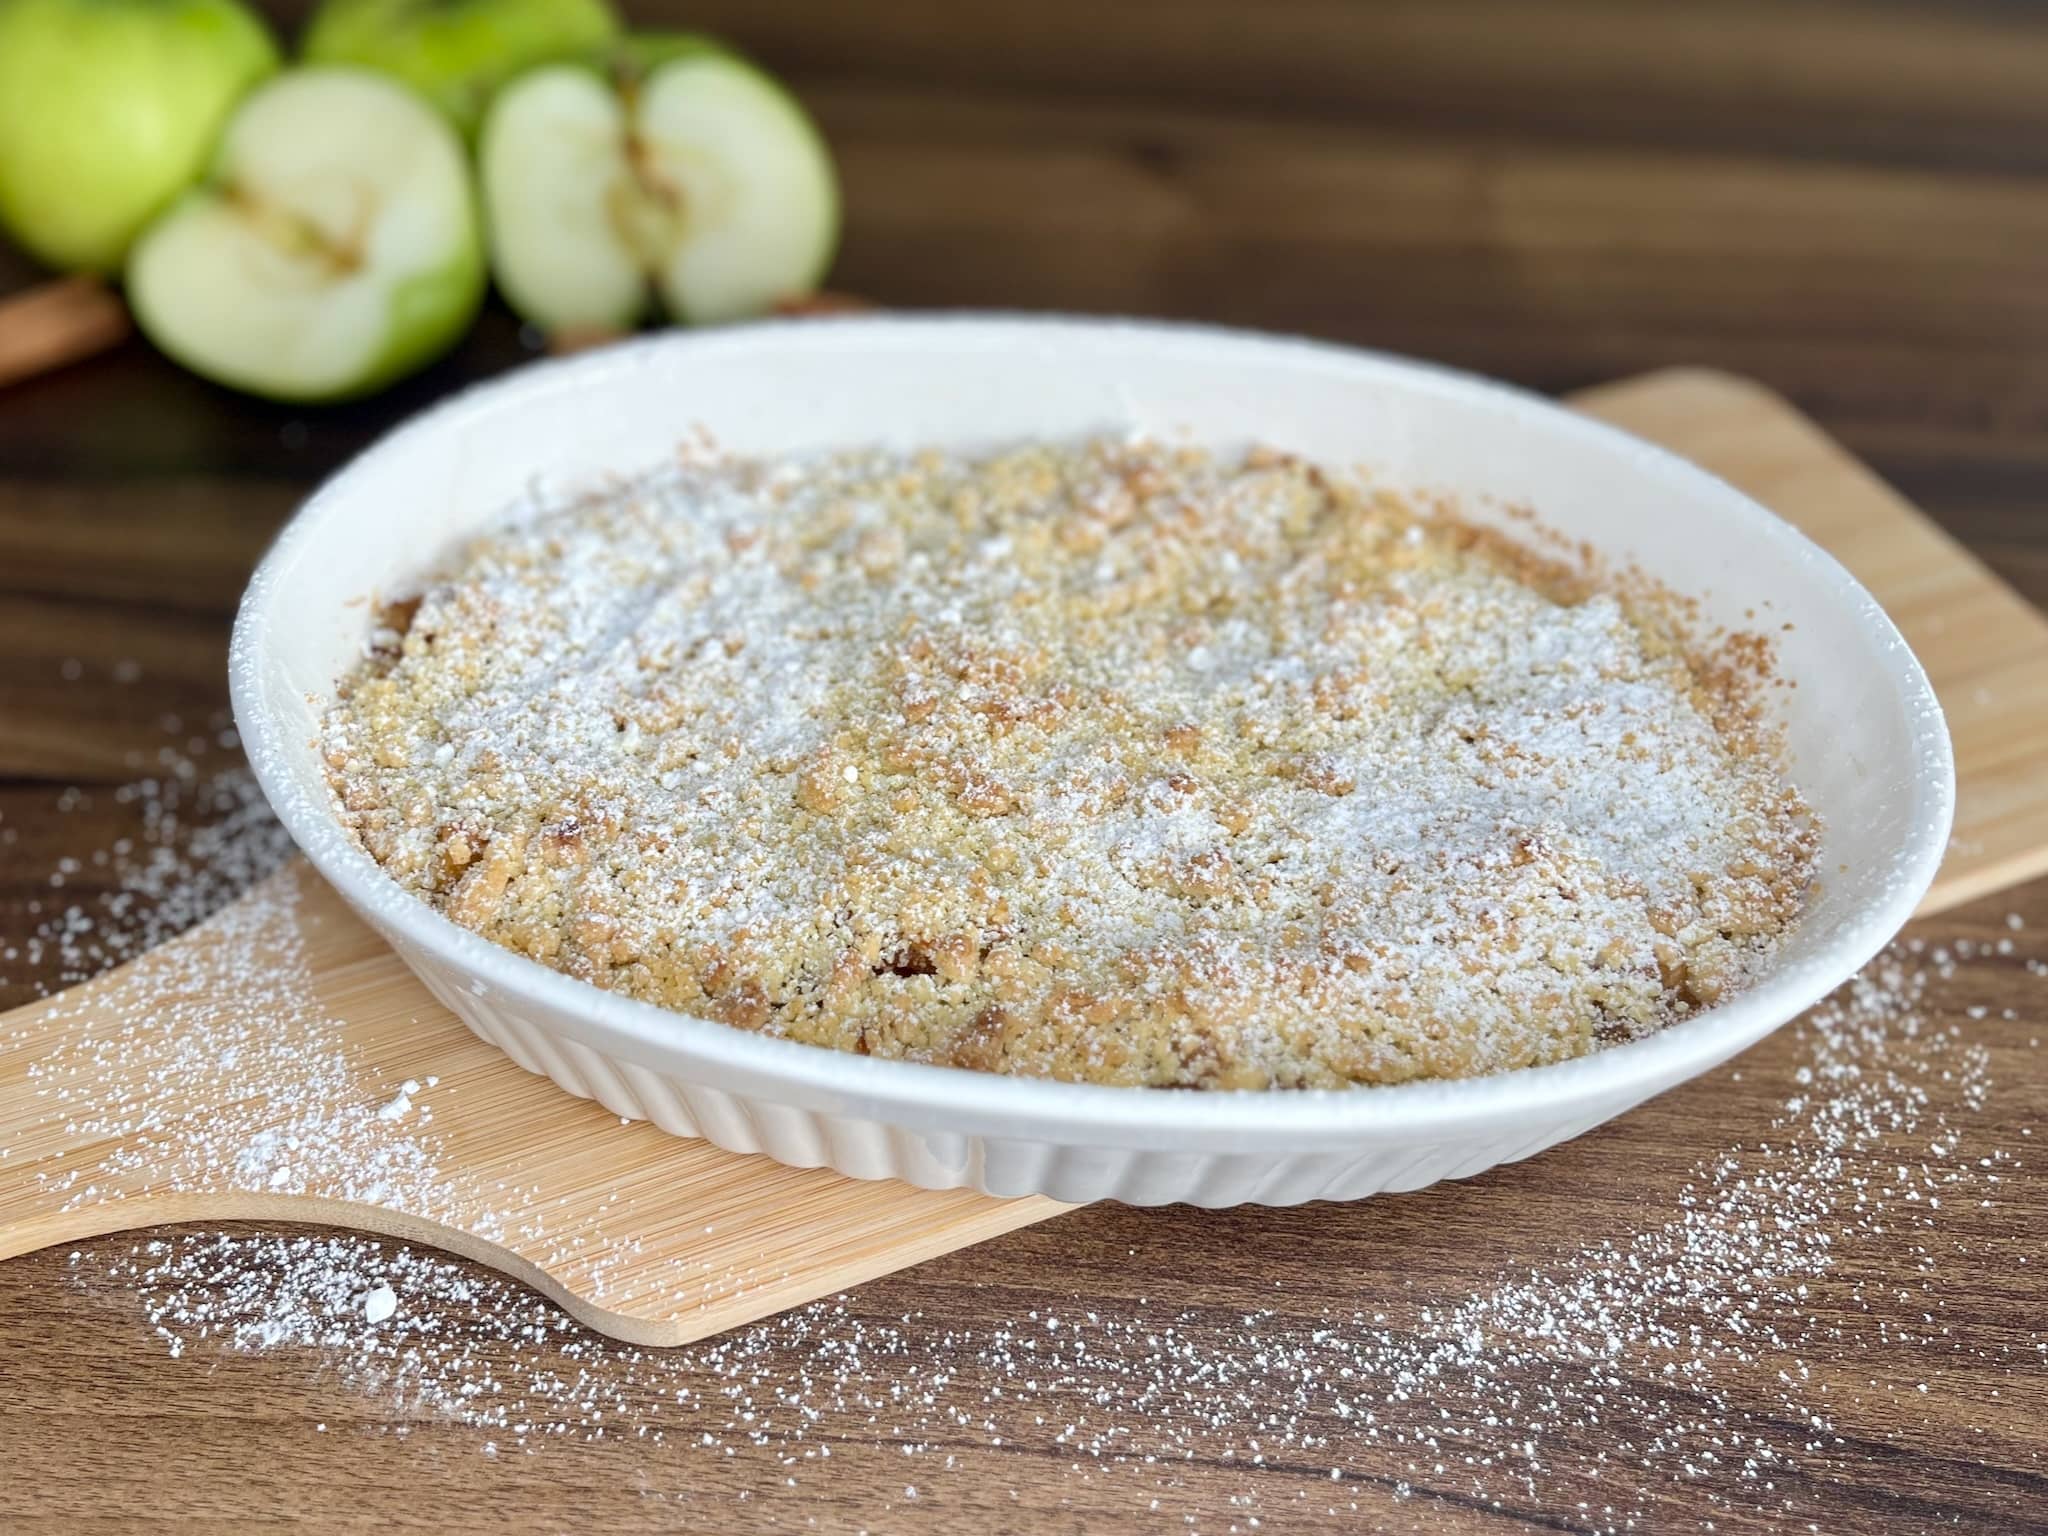 Nicely baked and dusted Apple Crumble in a baking dish